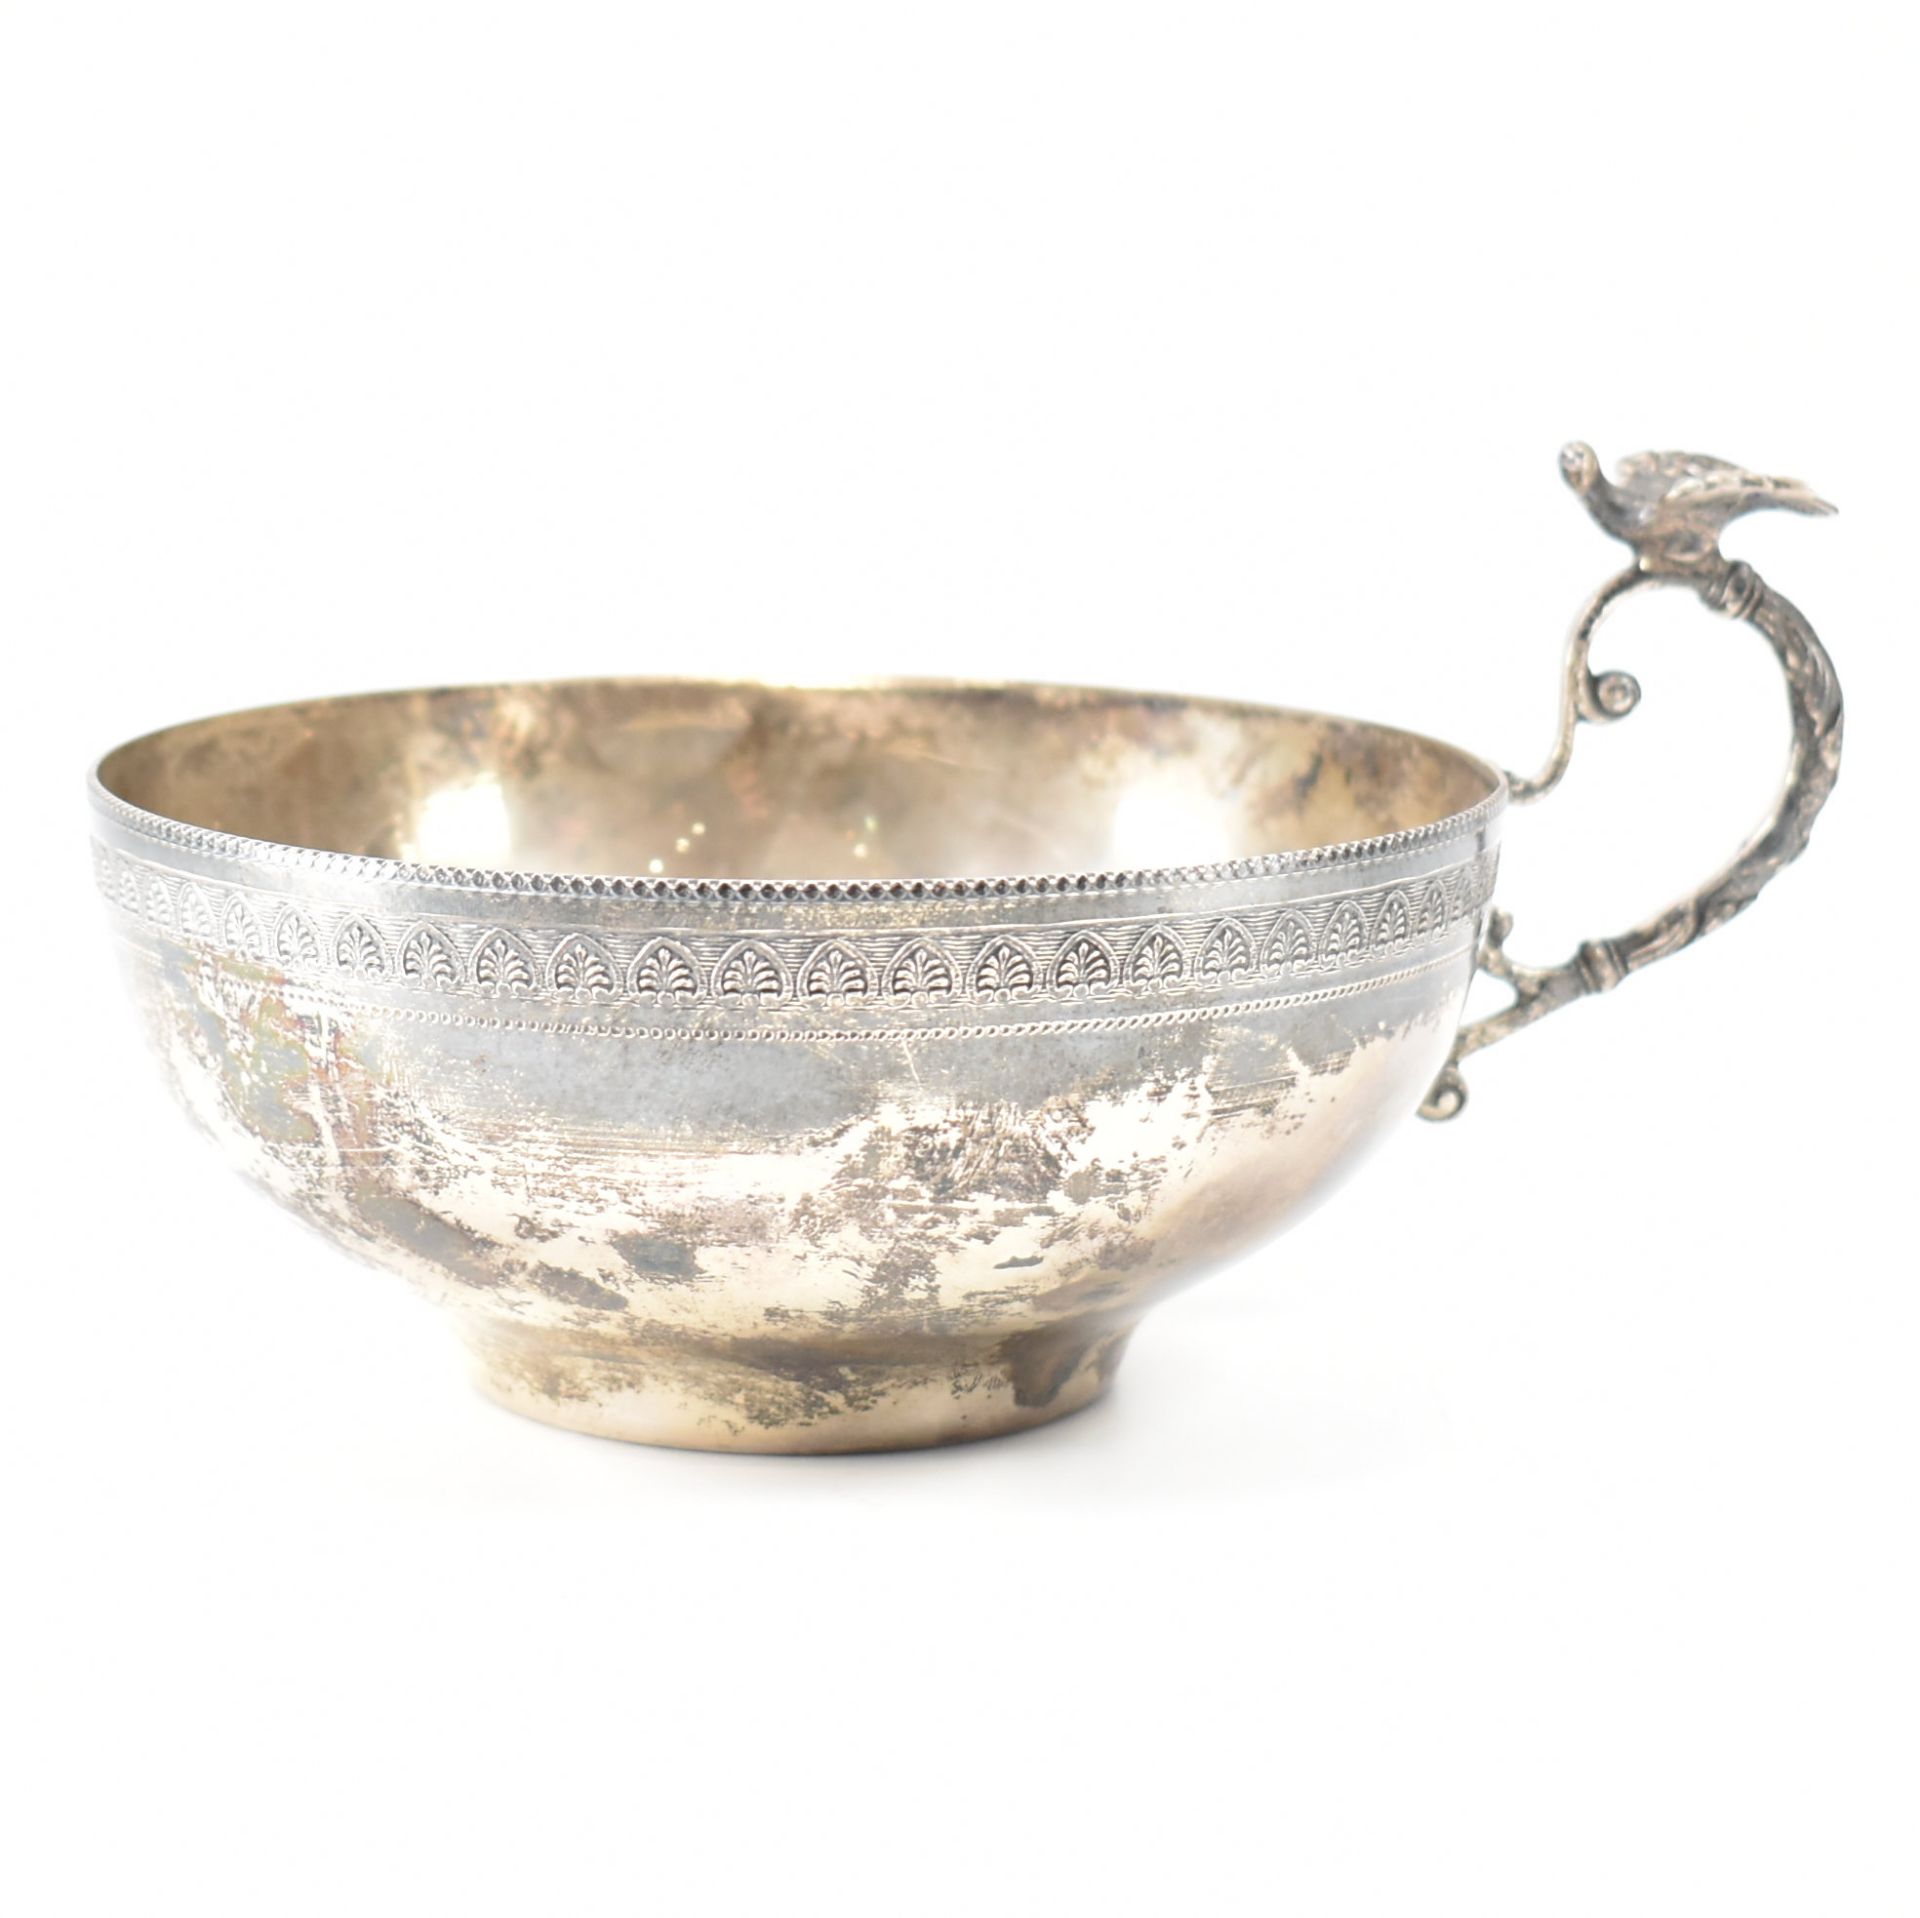 PERSIAN SILVER MIDDLE EASTERN SILVER BOWL